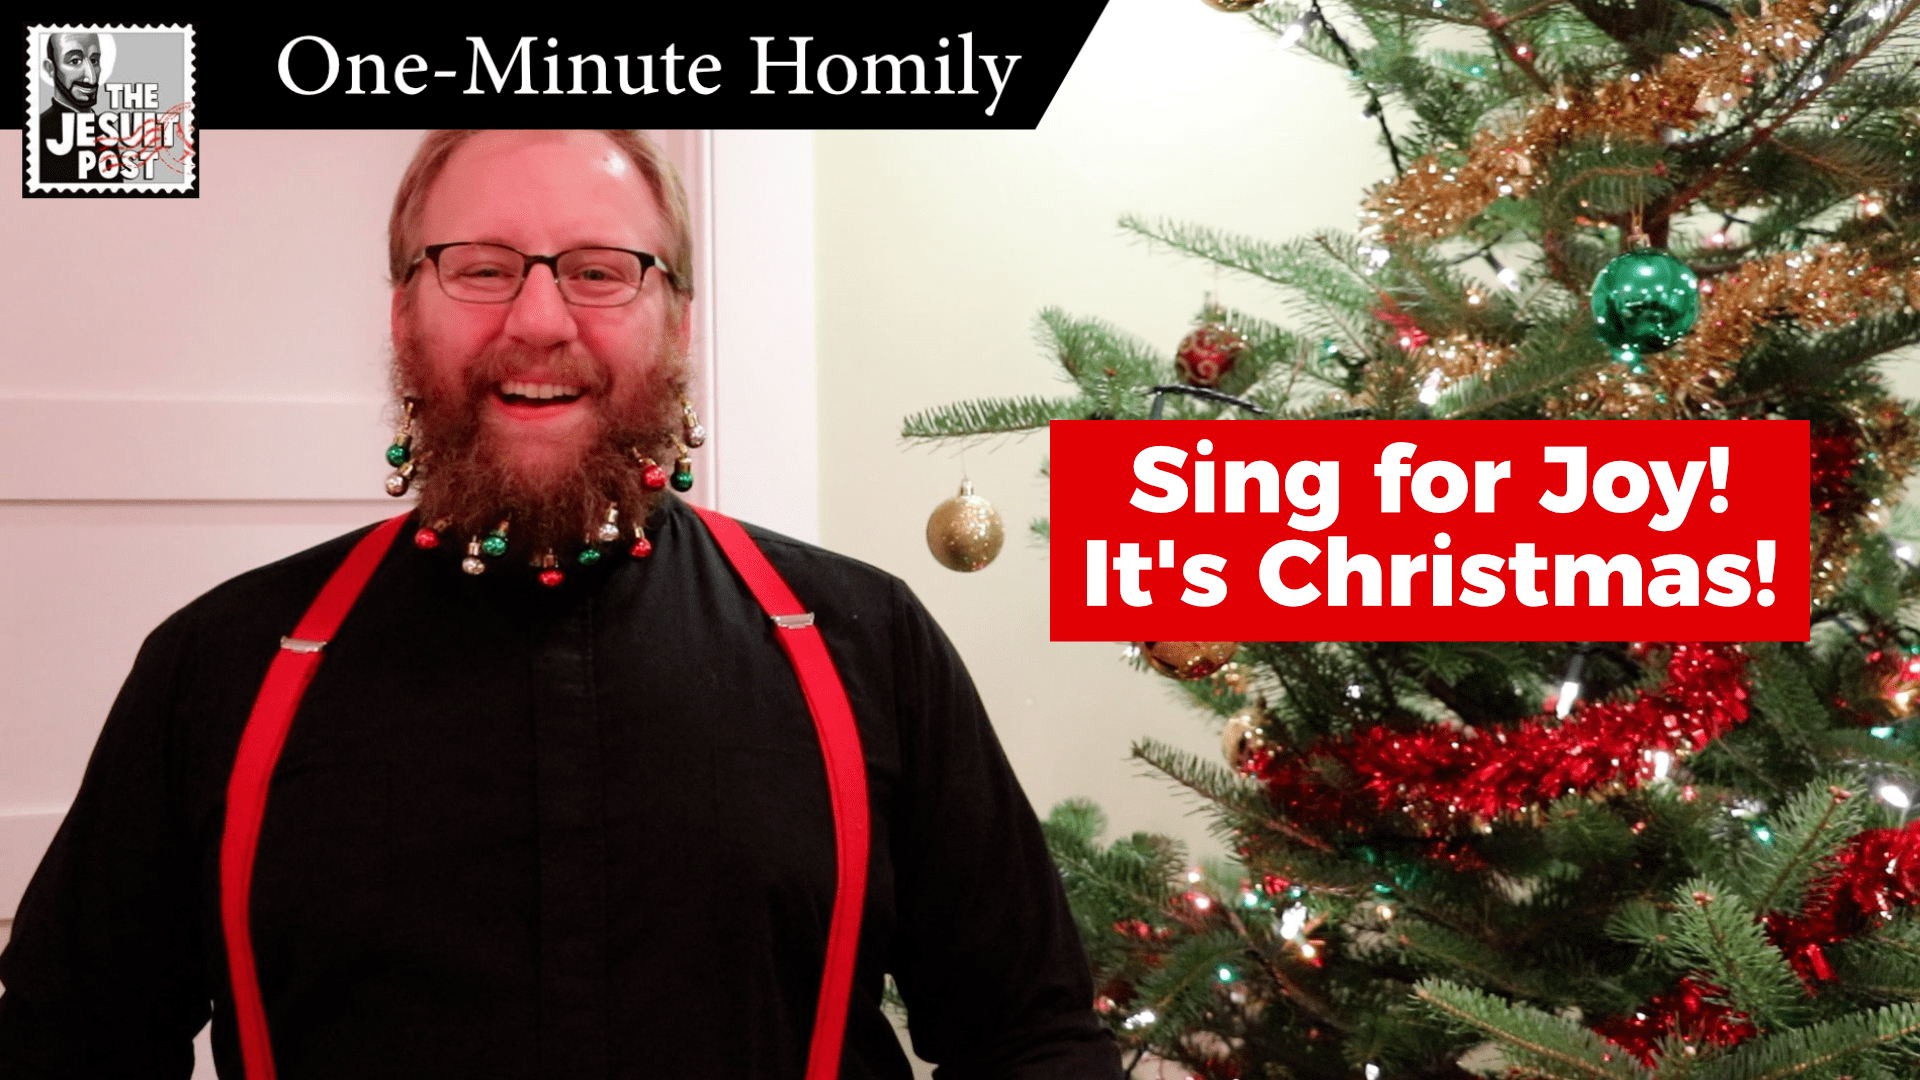 One-Minute Homily: “Sing for Joy! It’s Christmas!”